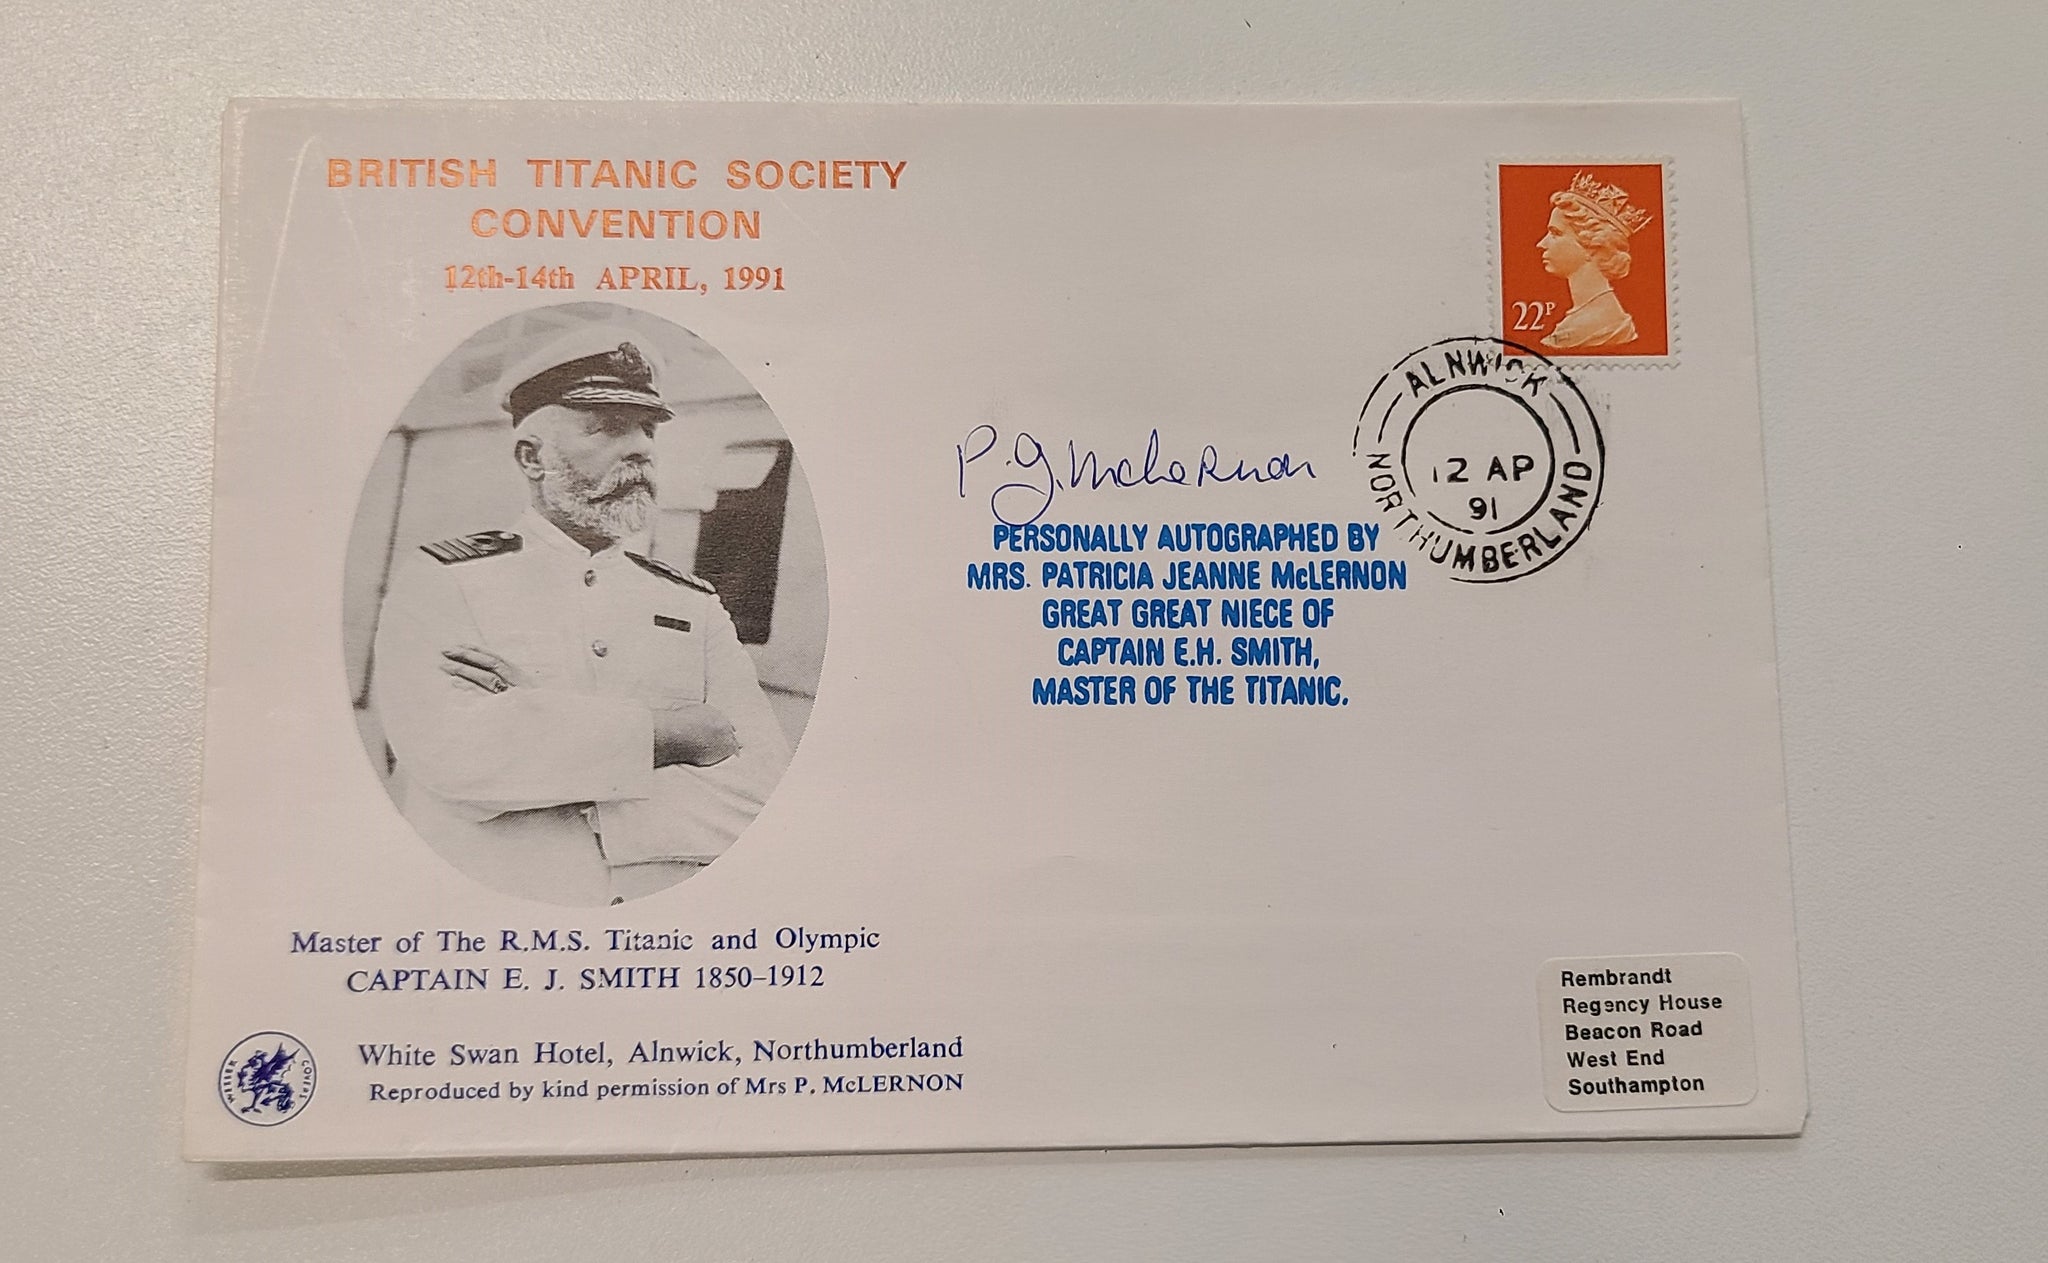 British Titanic Society Postal Cover signed CAPT Smith's Great Great Niece Mrs. Patricia McLernon